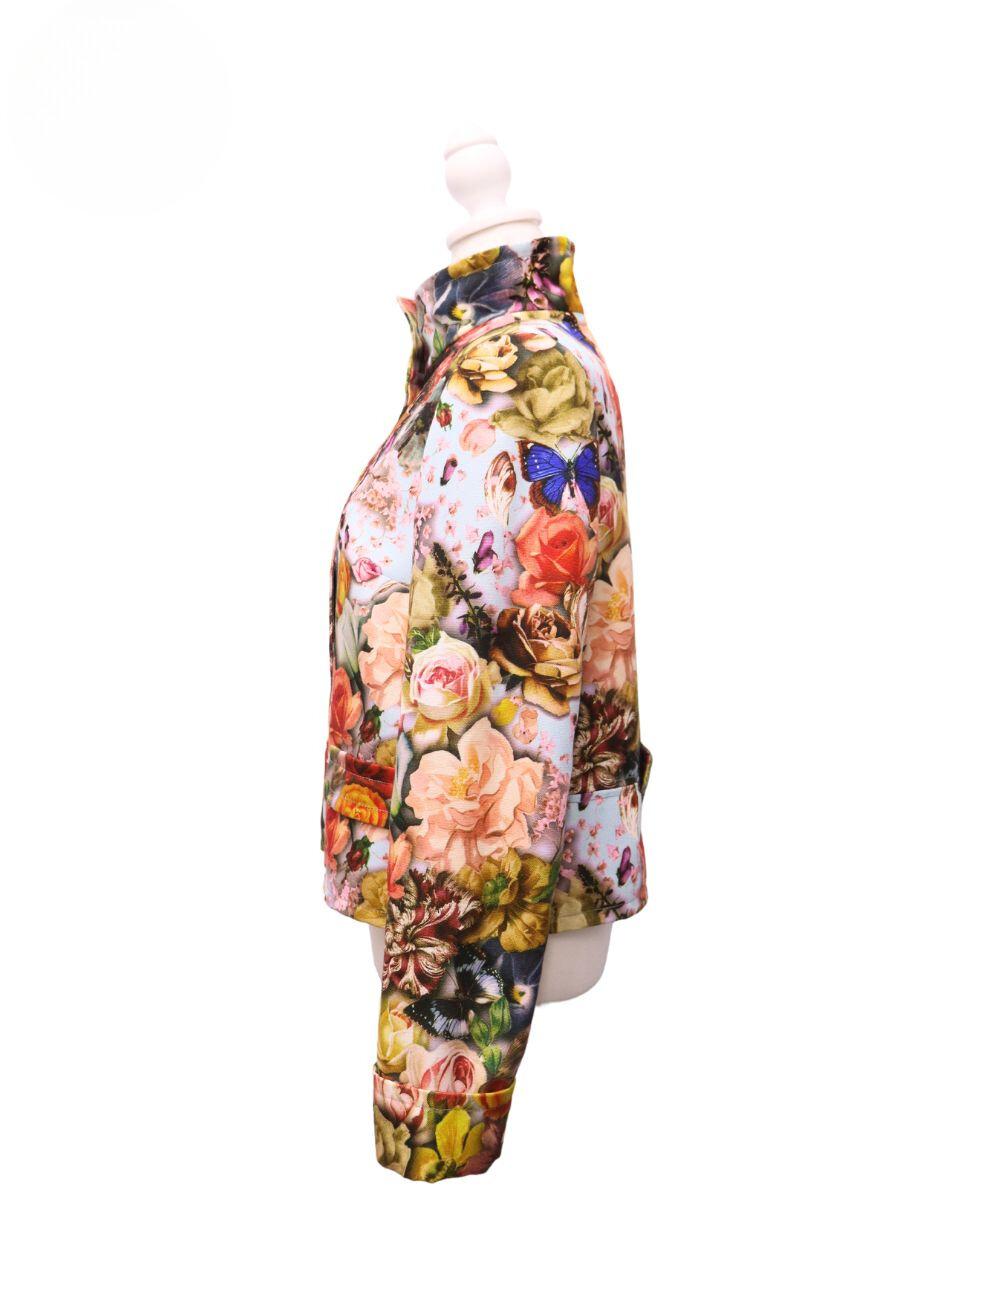 Ted Baker Lornah Floral Jacket Size 3 In Good Condition For Sale In Amman, JO